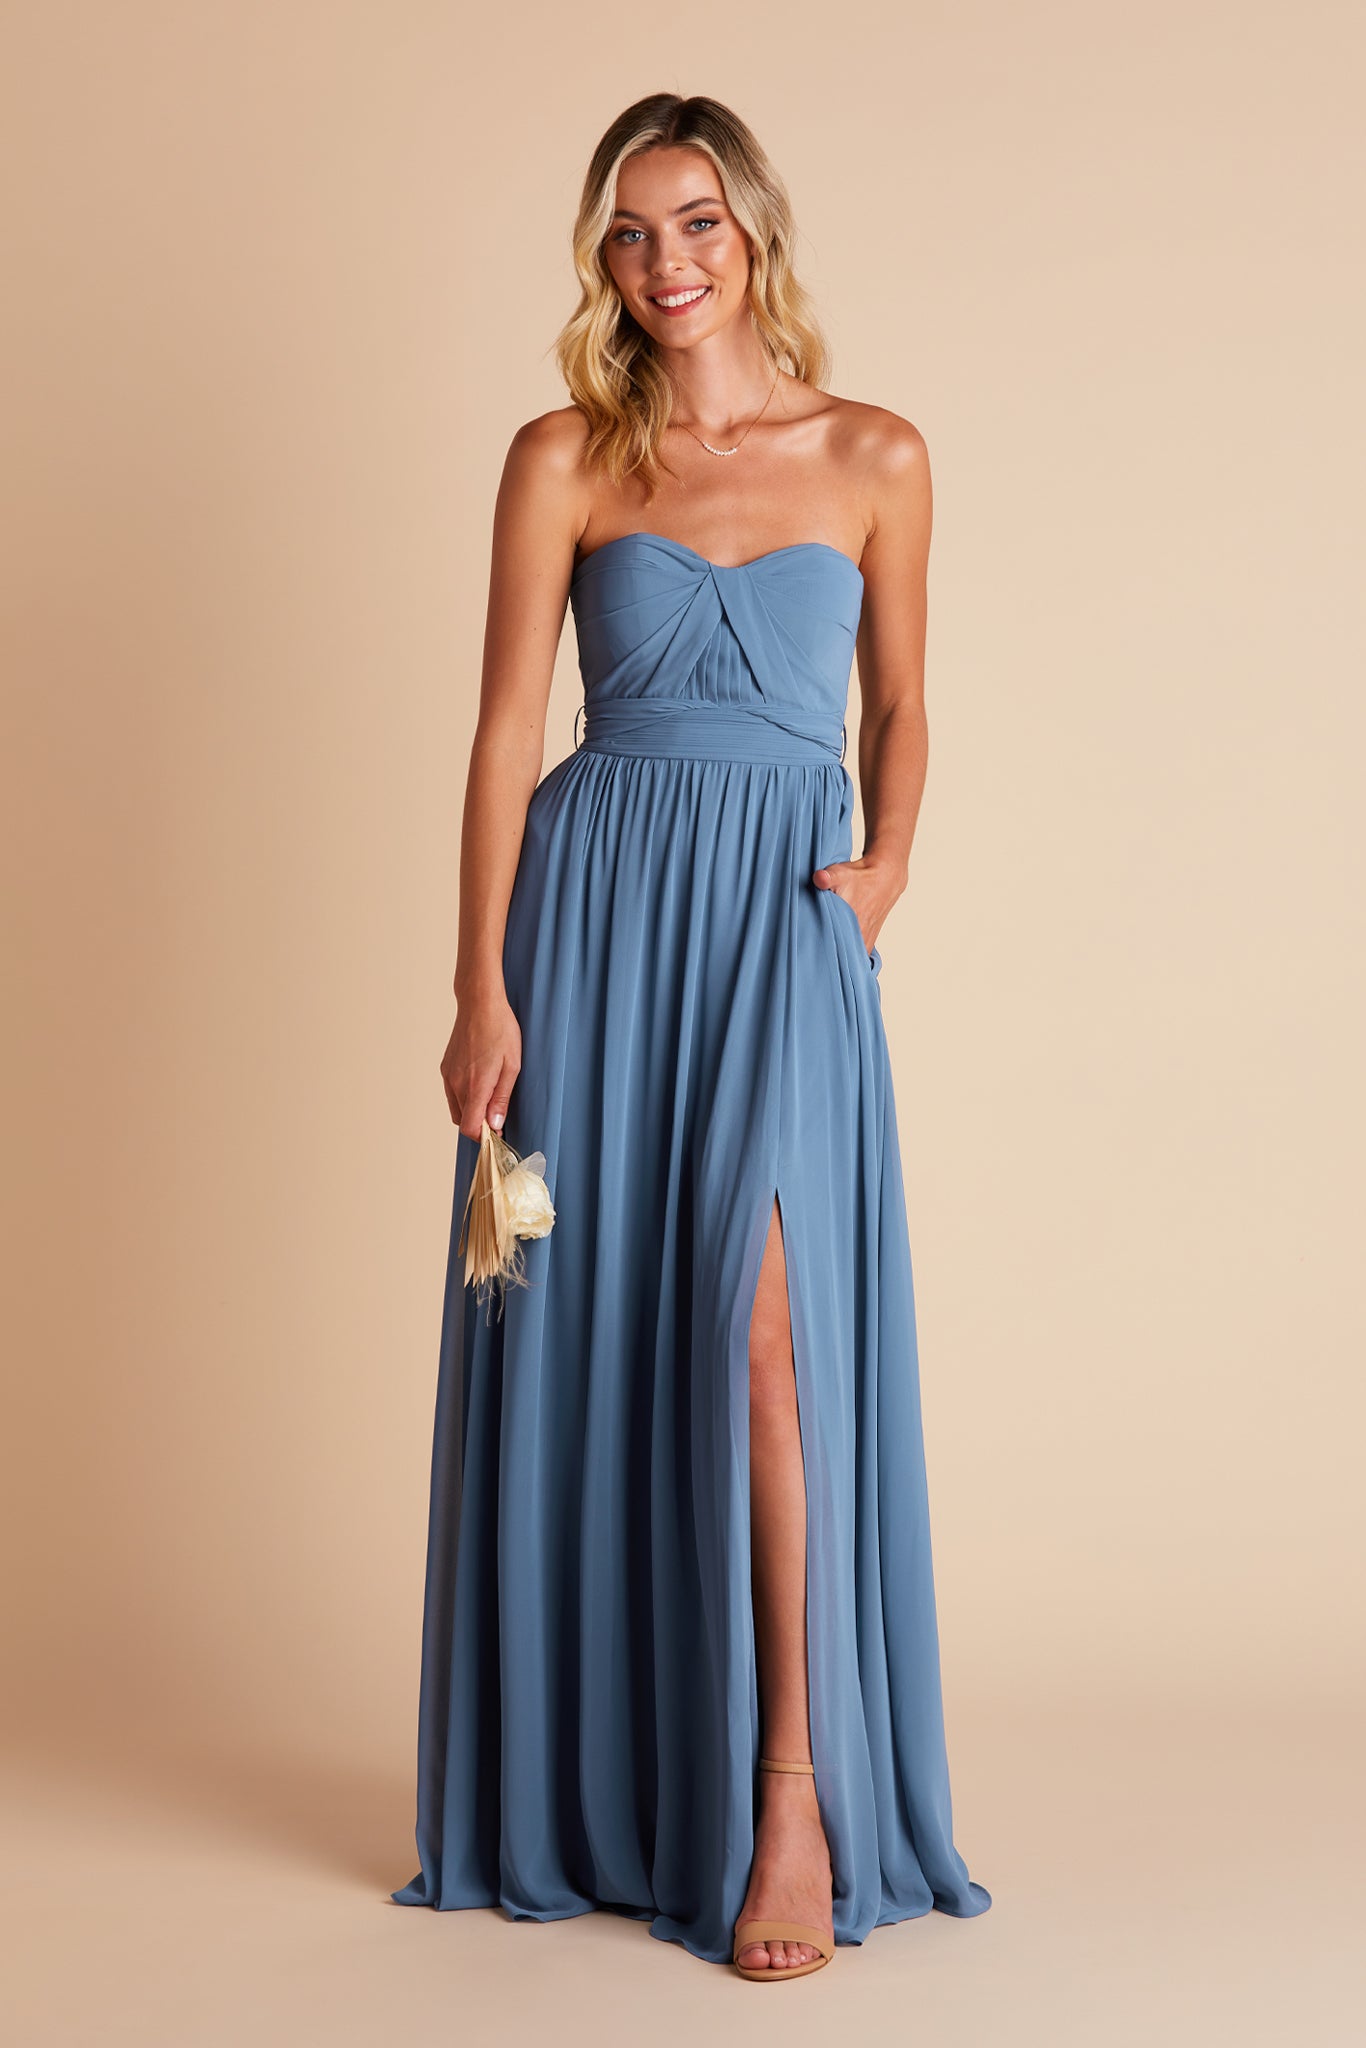 Grace convertible bridesmaid dress with slit in twilight blue chiffon by Birdy Grey, front view with hand in pocket